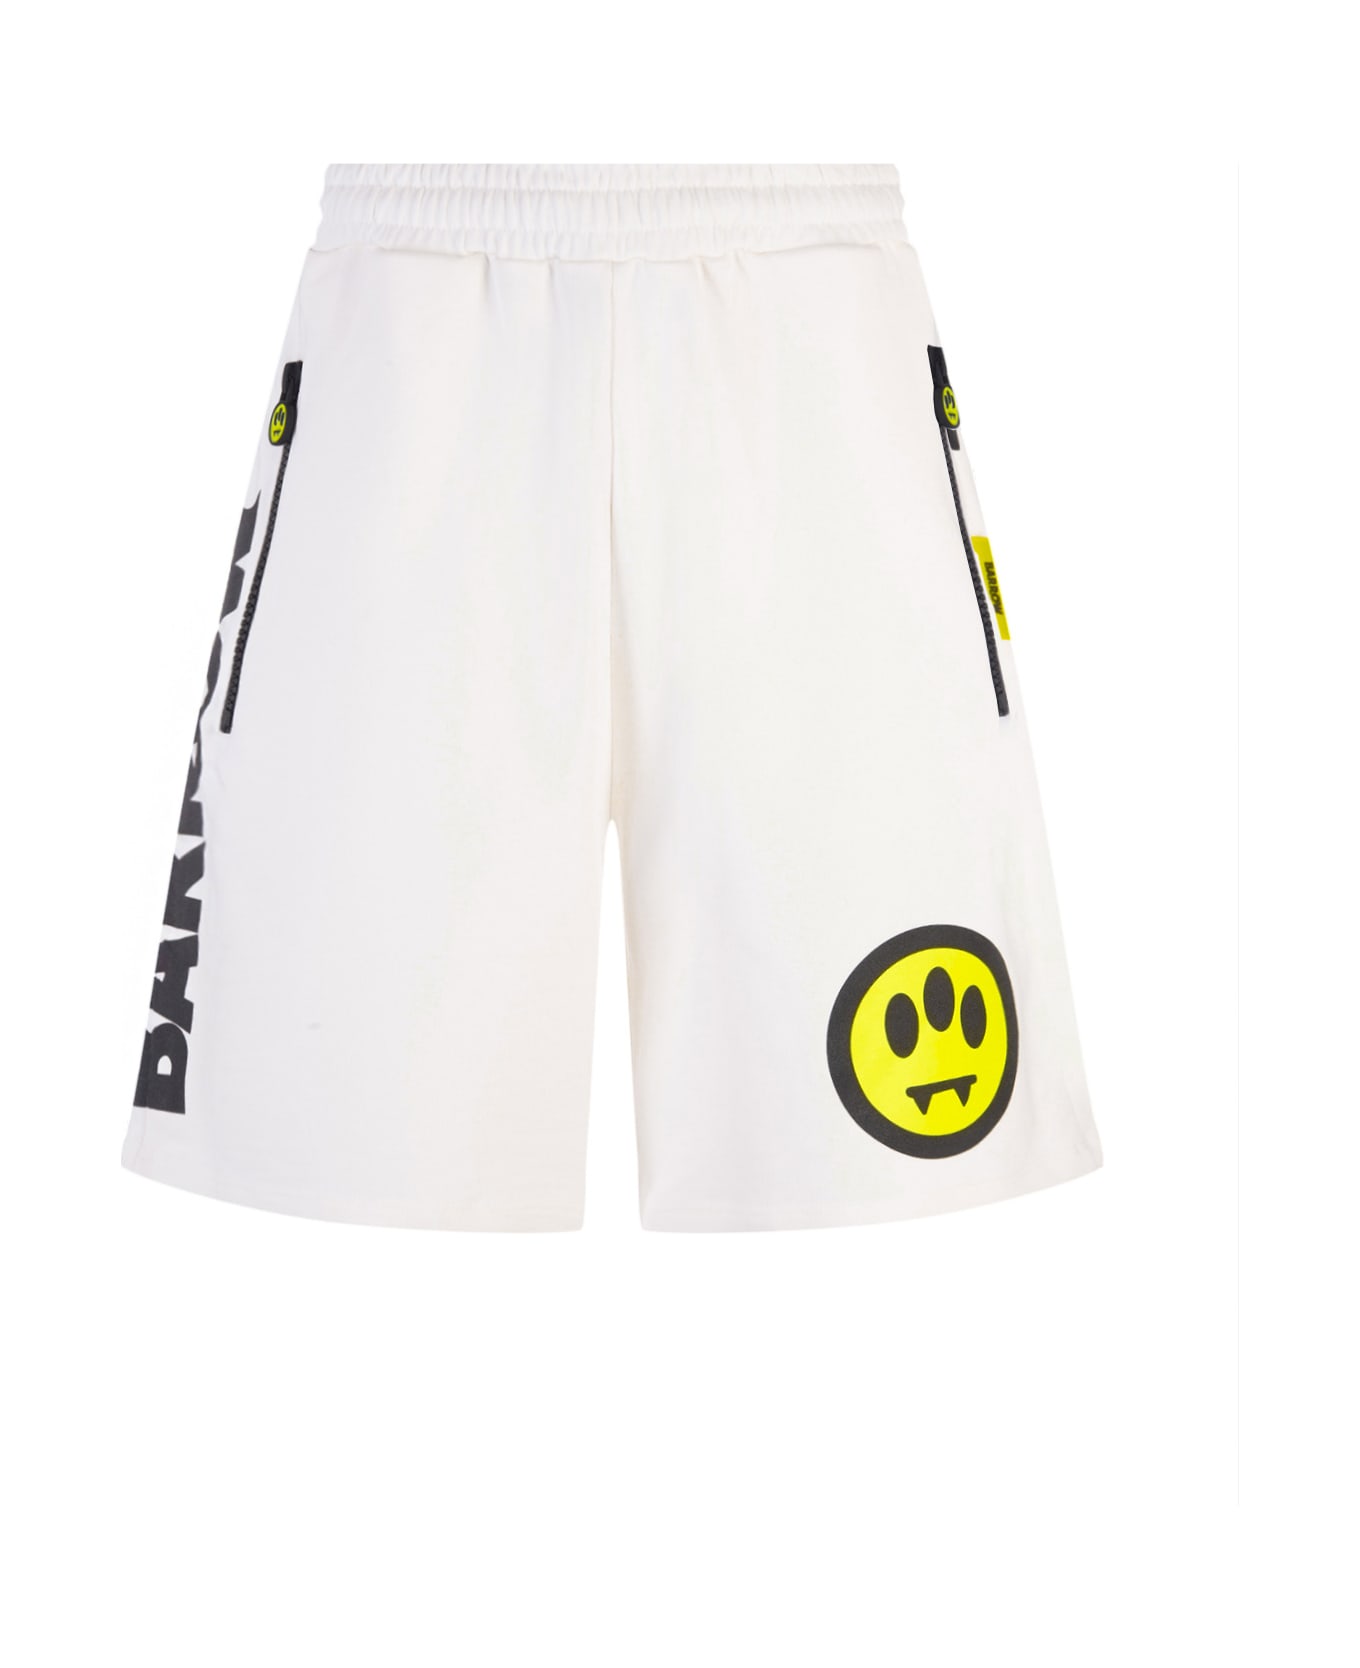 Barrow White Bermuda Shorts With Contrast Lettering Logo - White name:468